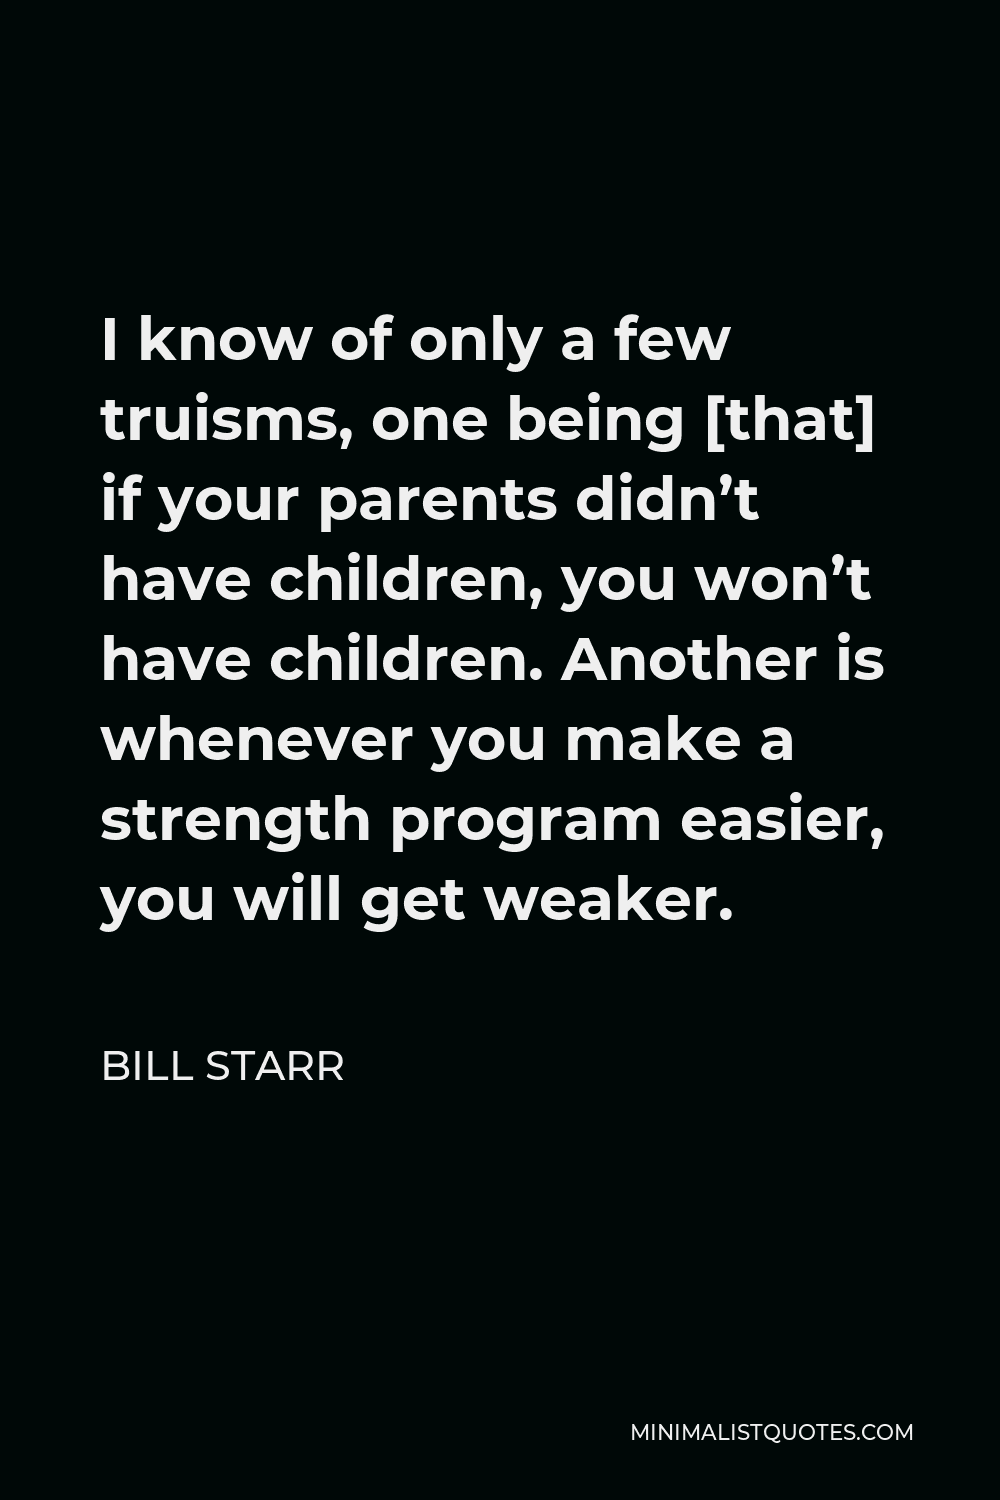 Bill Starr Quote - I know of only a few truisms, one being [that] if your parents didn’t have children, you won’t have children. Another is whenever you make a strength program easier, you will get weaker.